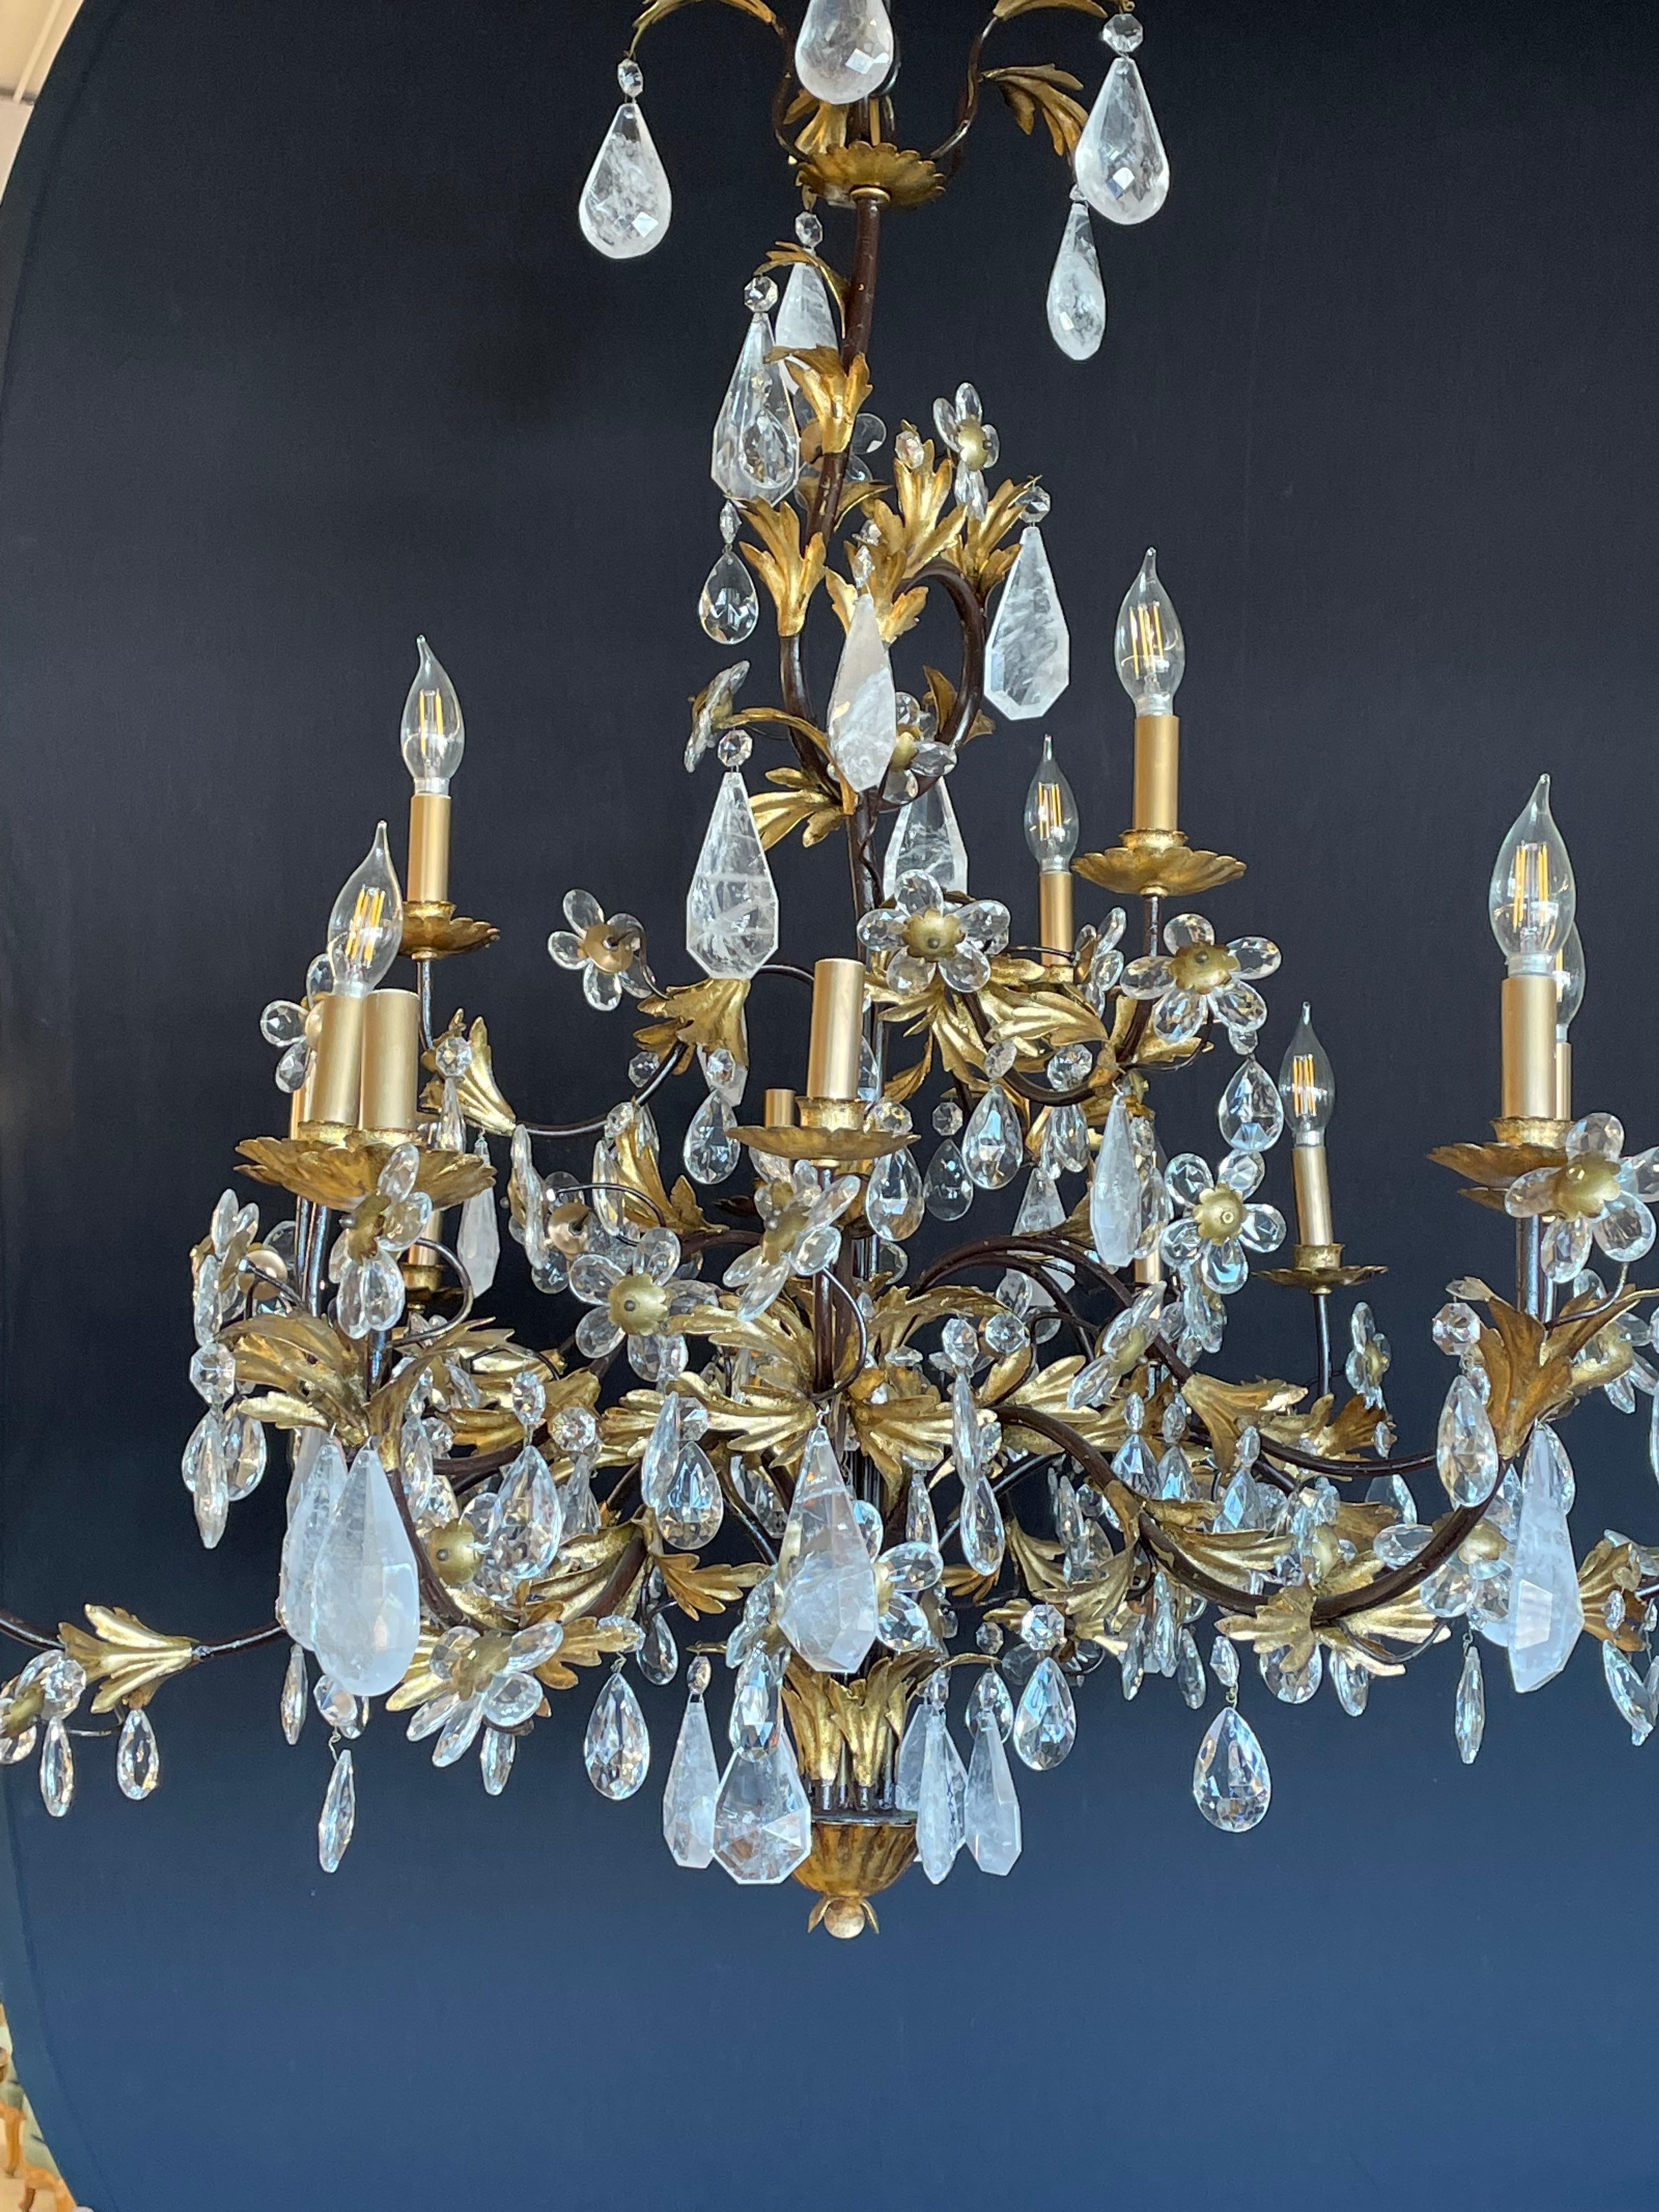 A Hollywood Regency or Louis XVI Style Chandelier having many large and impressive rock crystals prisms hanging from an ebony and gilt metal frame of floral, swag and large crystal roses. This finely craft stunning chandelier is not served well by